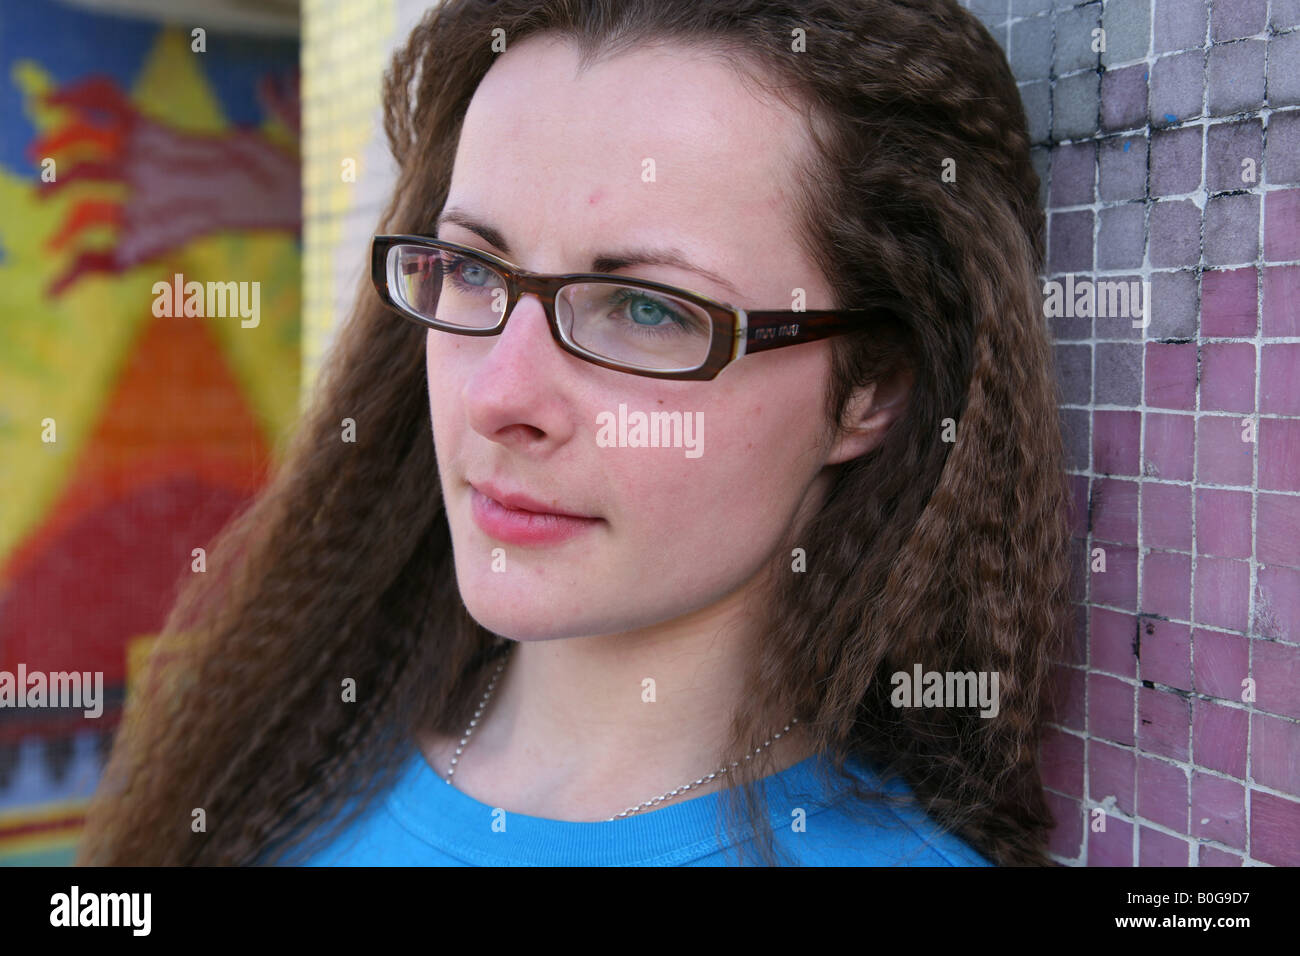 Caucasian female teenage student looking upset taken outside in a graffiti covered underpass on a council estate Stock Photo